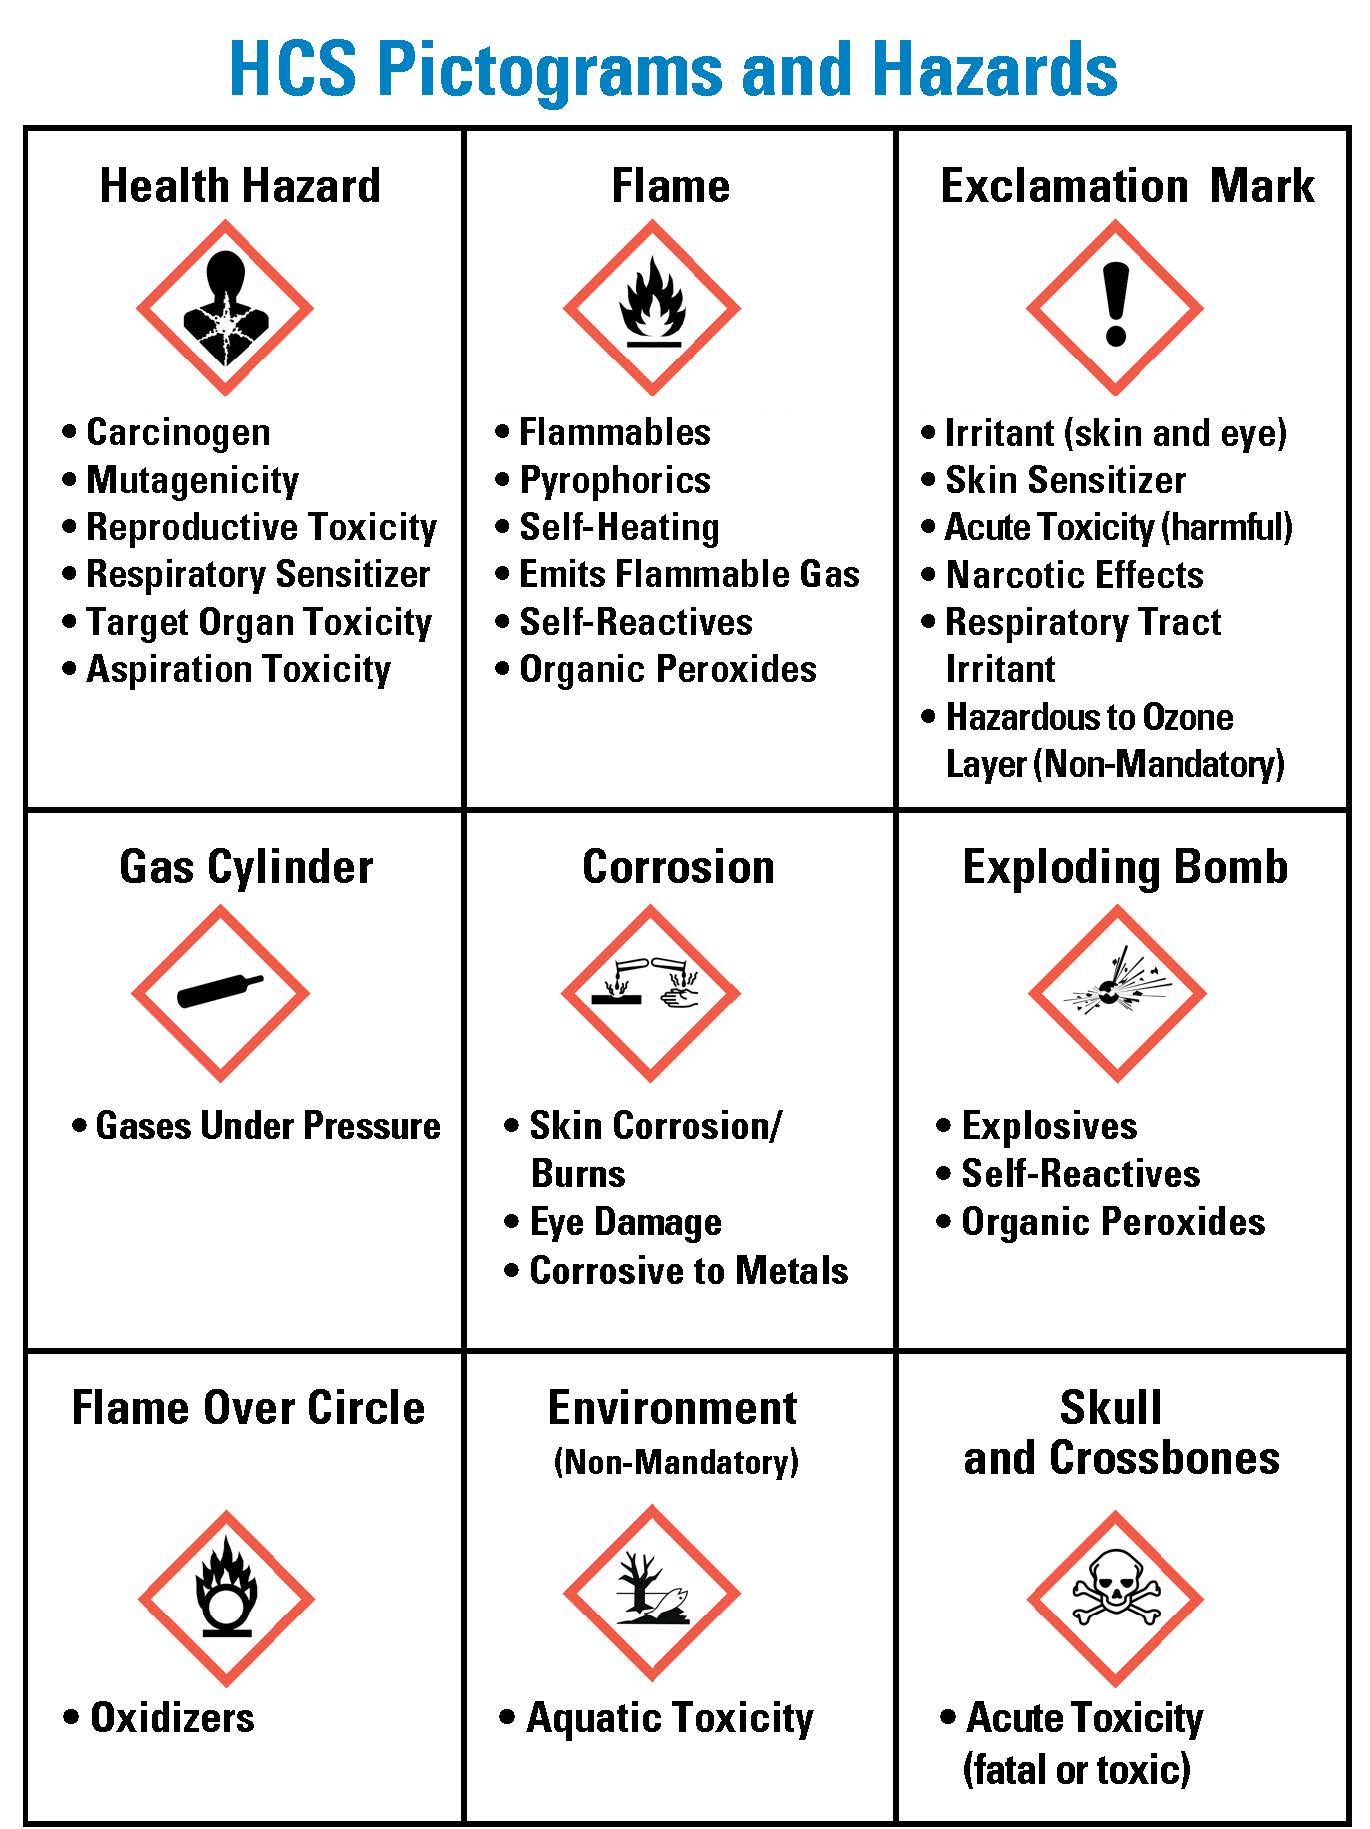 A Visual Guide to Pictograms, Chemical Labels, and SDS ZING